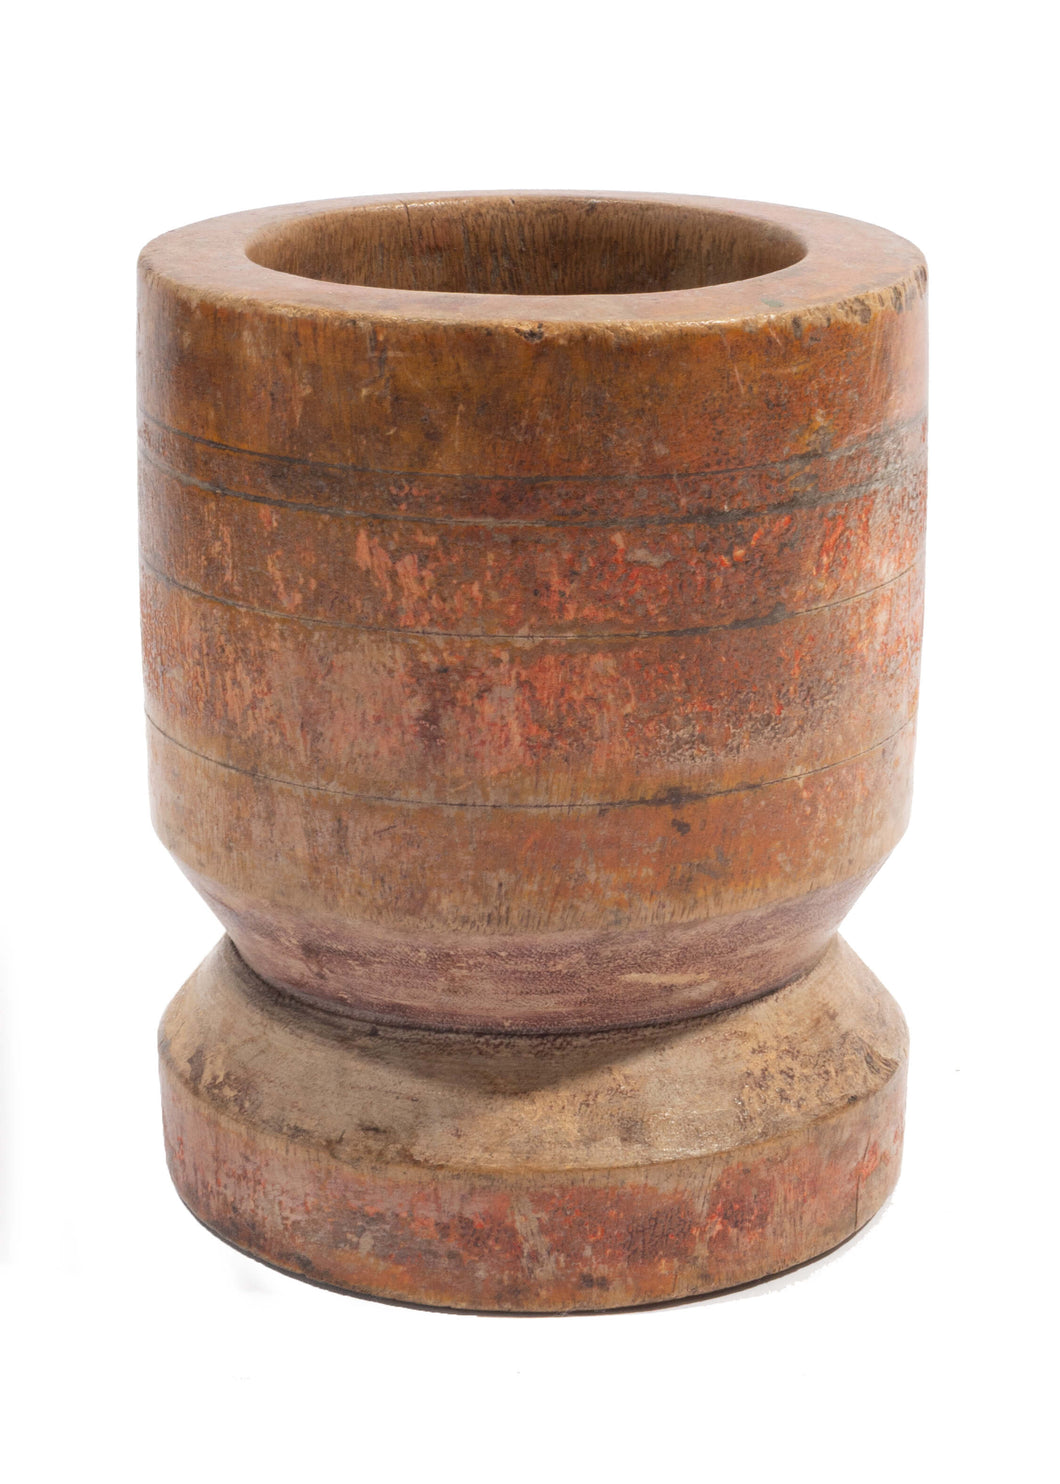 Lacquered Wooden Mortar